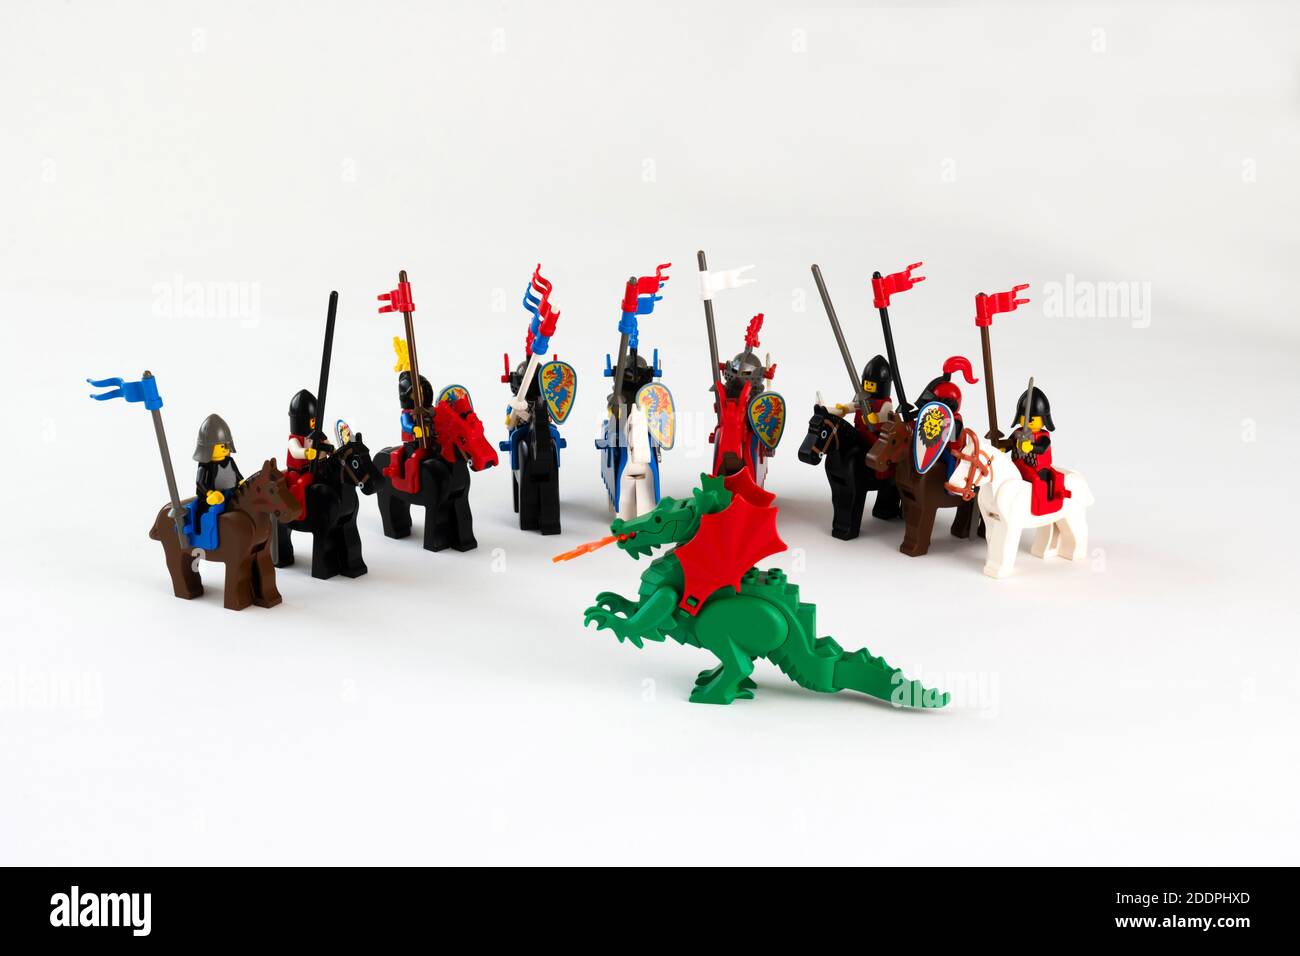 Lego Dragon High Resolution Stock Photography and Images - Alamy